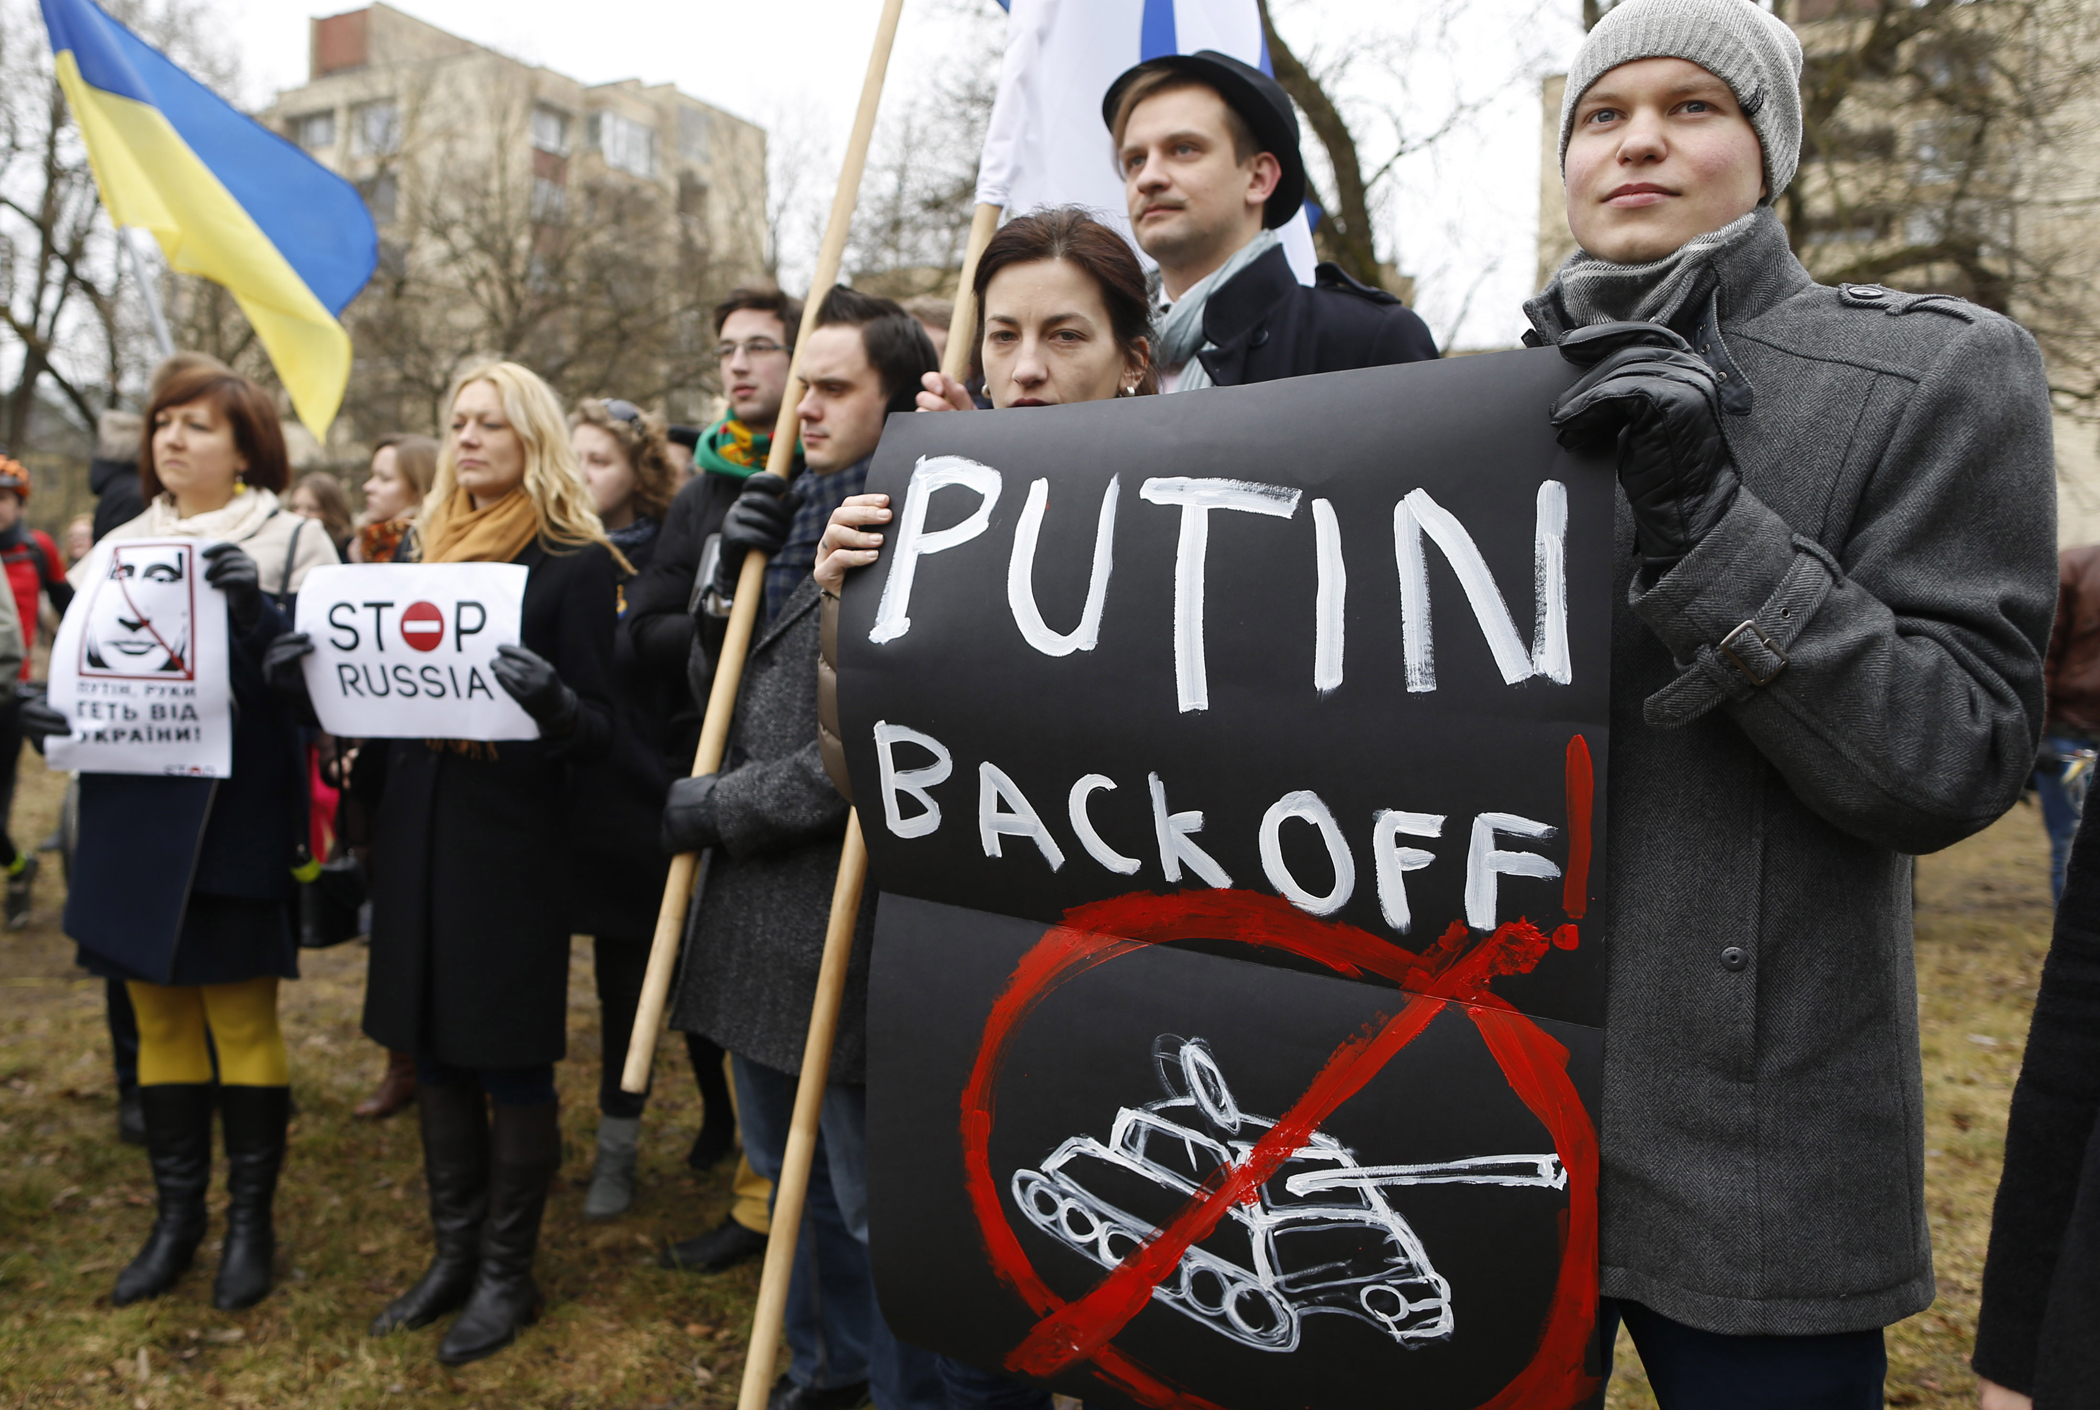 Demonstrators gather outside the Russian Embassy in Vilnius, Lithuania, to protest against Russian intervention in Ukraine, in March 2014. (Mindaugas Kulbis—AP)